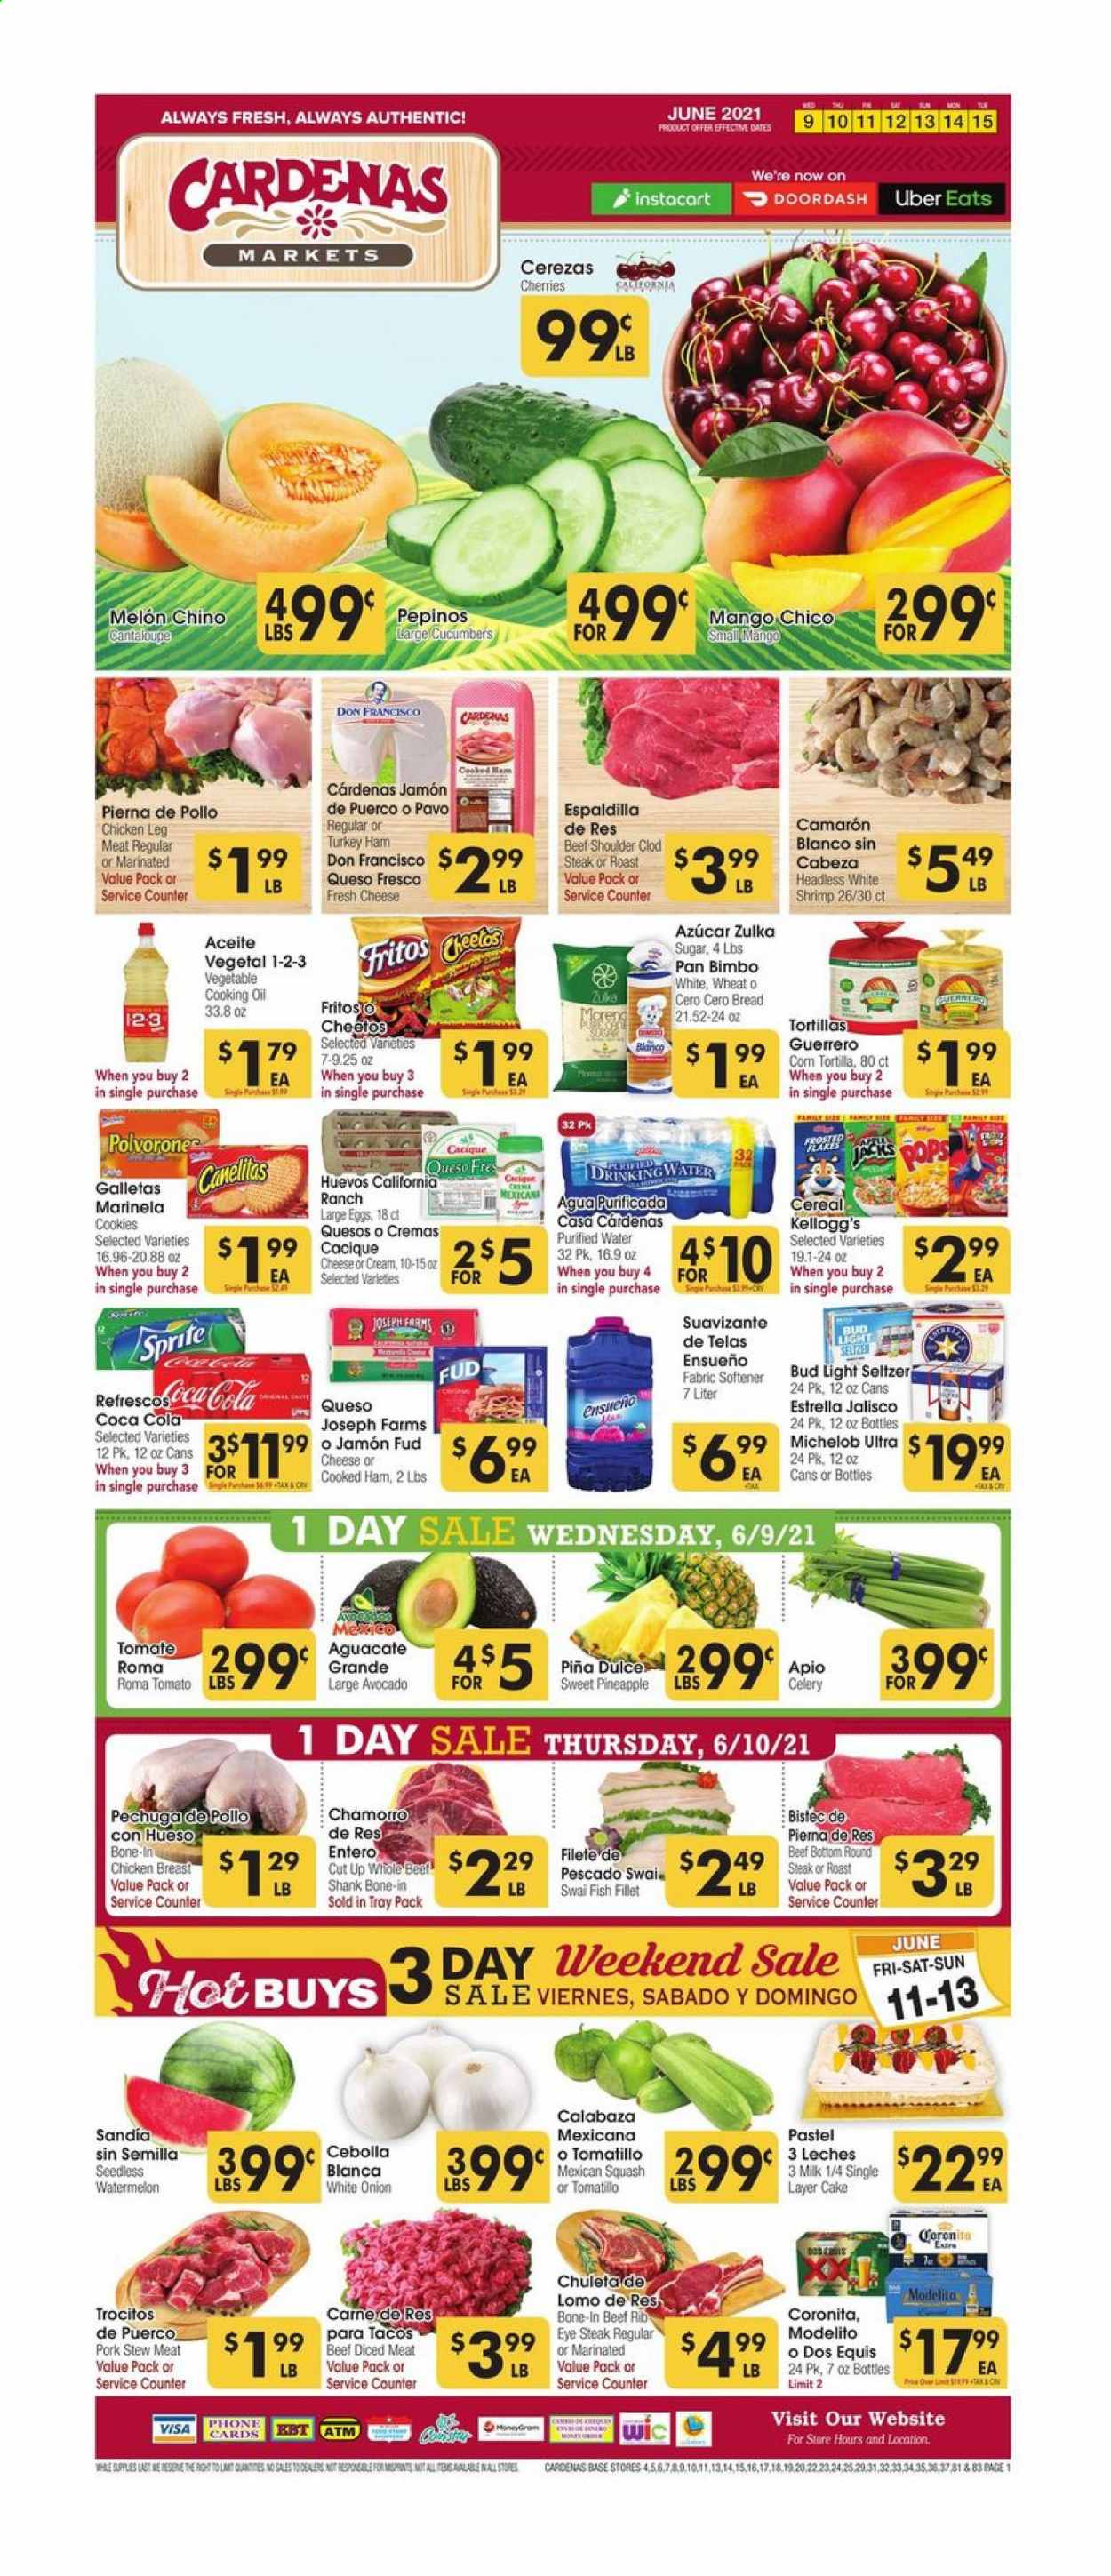 thumbnail - Cardenas Flyer - 06/09/2021 - 06/15/2021 - Sales products - stew meat, bread, tortillas, cantaloupe, celery, cucumber, tomatillo, tomatoes, sleeved celery, mexican squash, avocado, mango, watermelon, pineapple, cherries, fish fillets, fish, shrimps, swai fillet, cooked ham, ham, queso fresco, milk, large eggs, cookies, Kellogg's, Fritos, Cheetos, sugar, cereals, oil, Coca-Cola, Sprite, purified water, Hard Seltzer, beer, Dos Equis, Michelob, Bud Light, chicken breasts, chicken legs, beef meat, steak, round steak, ribeye steak, fabric softener, pan, melons. Page 1.